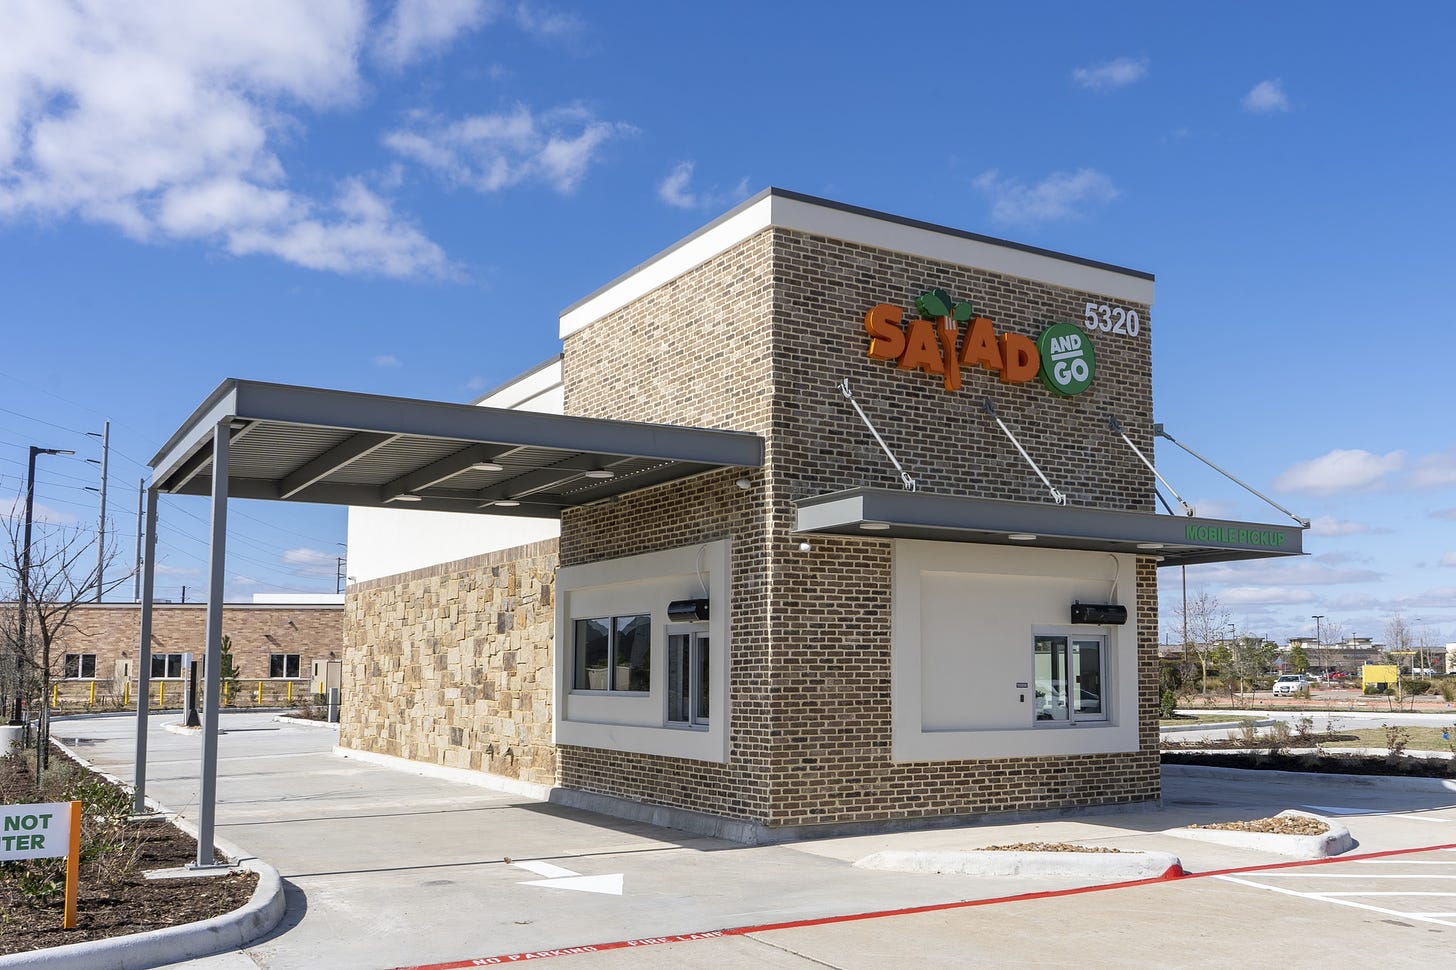 Salad and Go healthy fast-food chain debuts in Houston